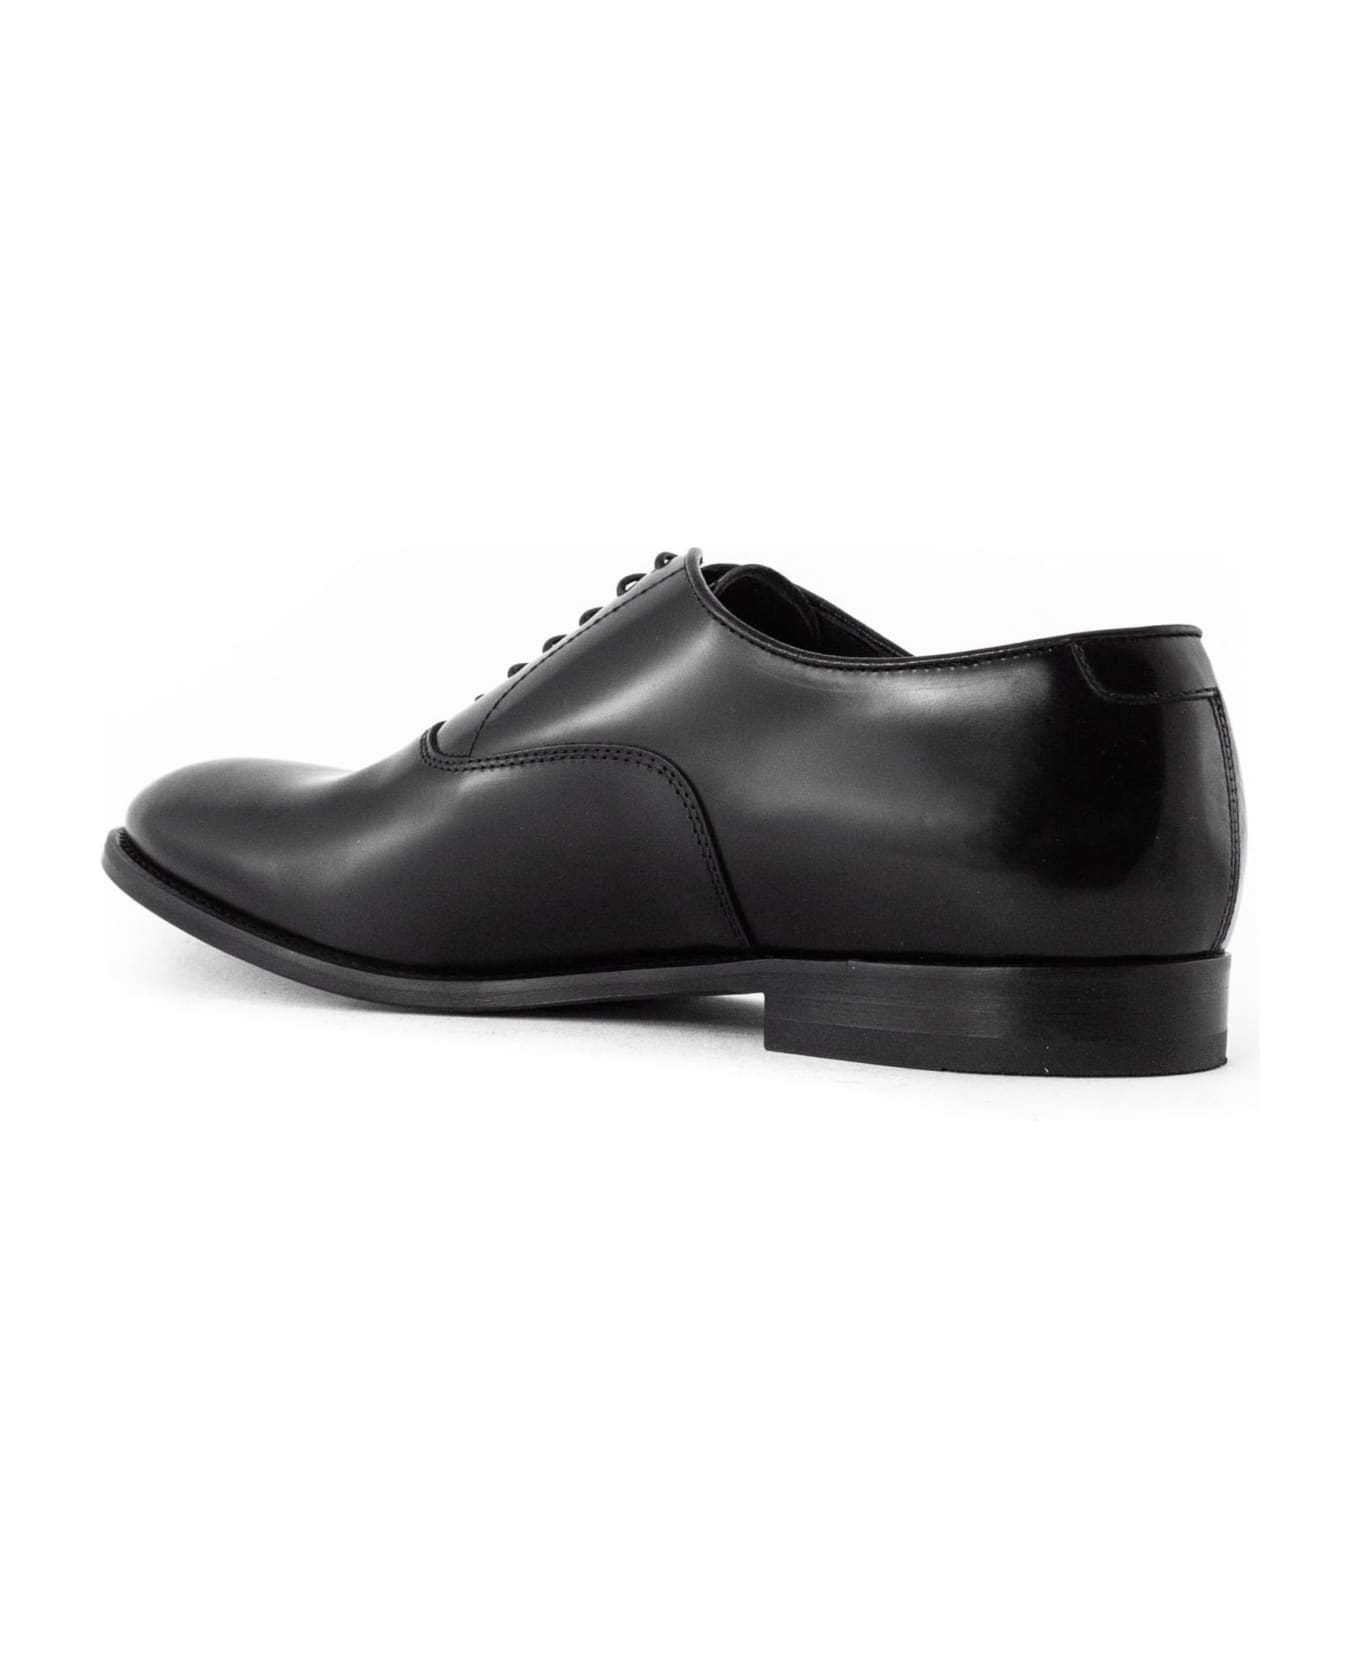 Doucal's Oxford Black Leather Laced Shoes - Black ローファー＆デッキシューズ